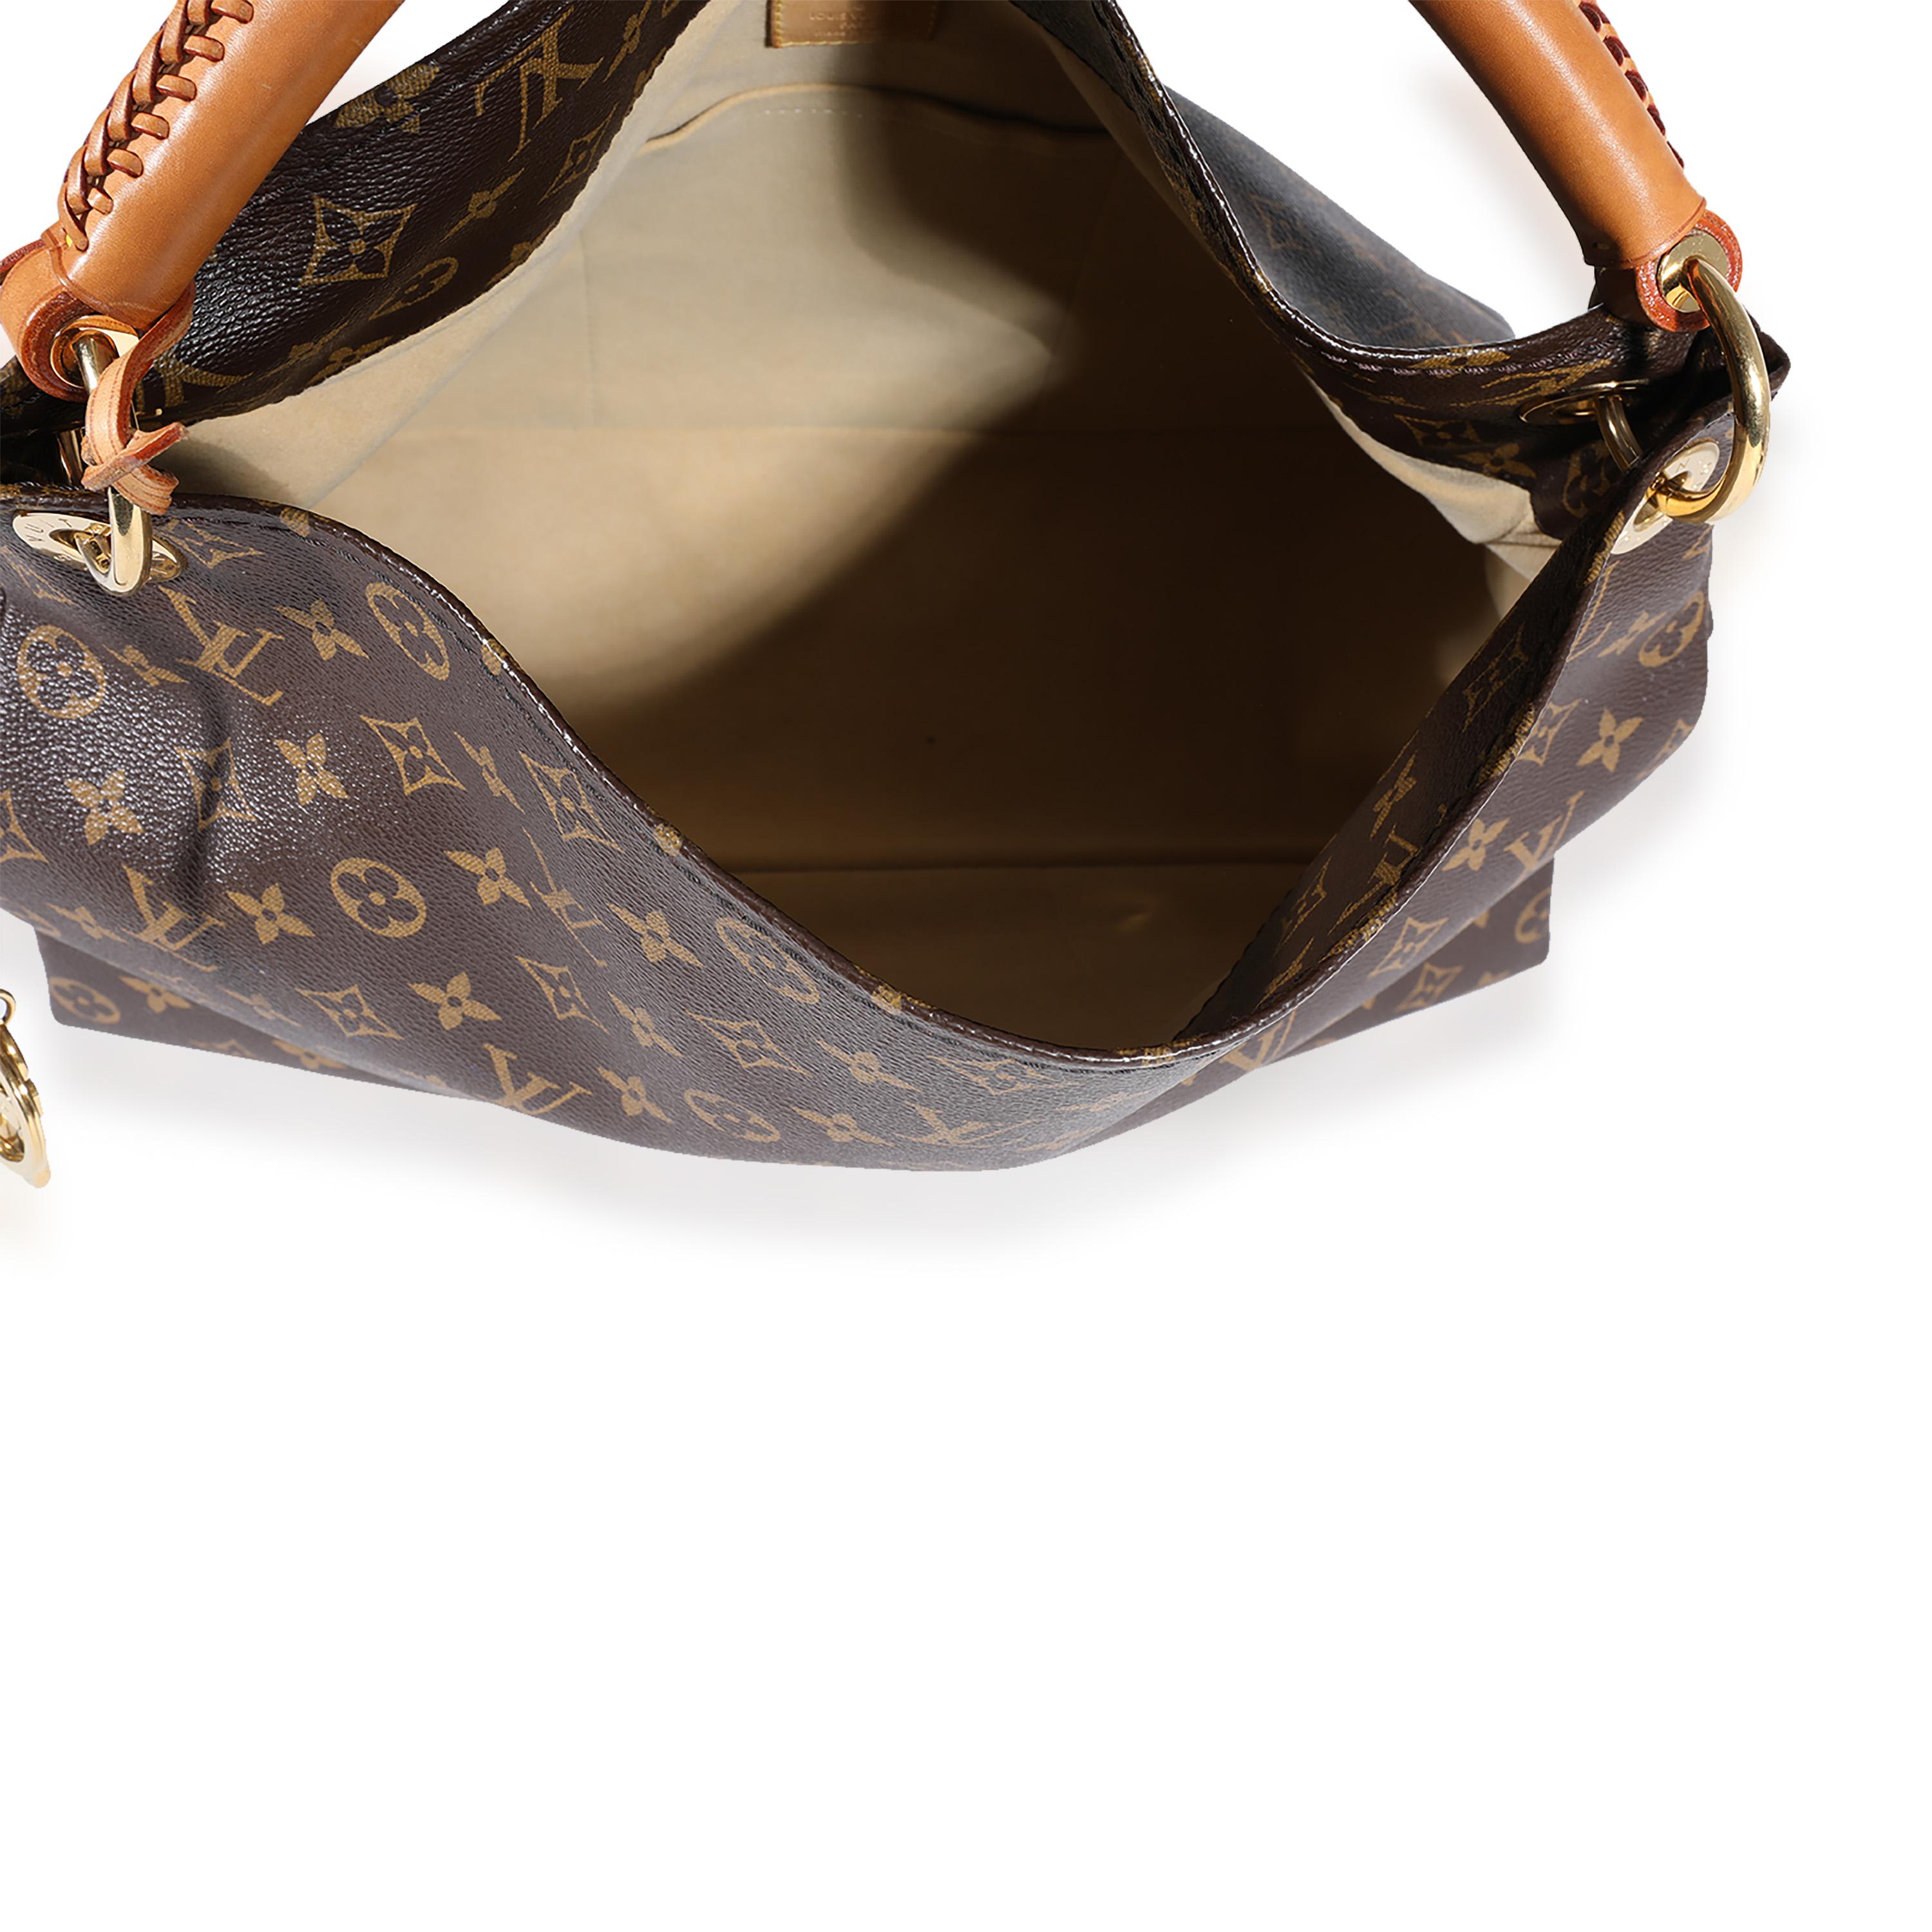 Listing Title: Louis Vuitton Monogram Canvas Artsy MM
SKU: 122516
MSRP: 2500.00
Condition: Pre-owned 
Handbag Condition: Very Good
Condition Comments: Very Good Condition. Patina and scuffing to leather. Scratching and tarnishing to hardware. Light